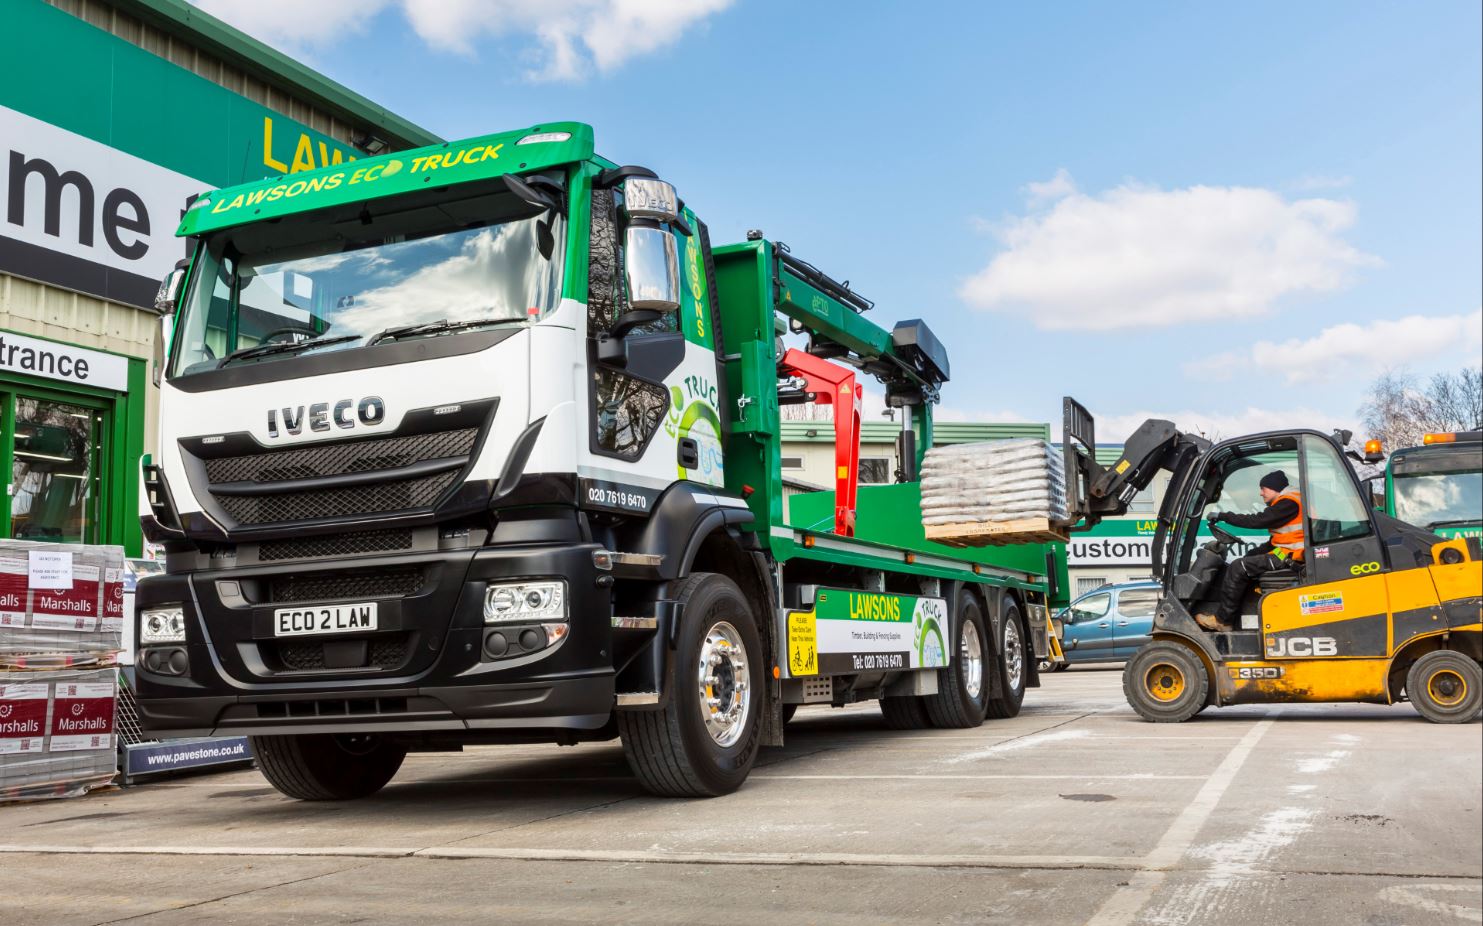 Iveco Stralis Natural Power- The Truck Of Choice For Builders Merchant Lawsons